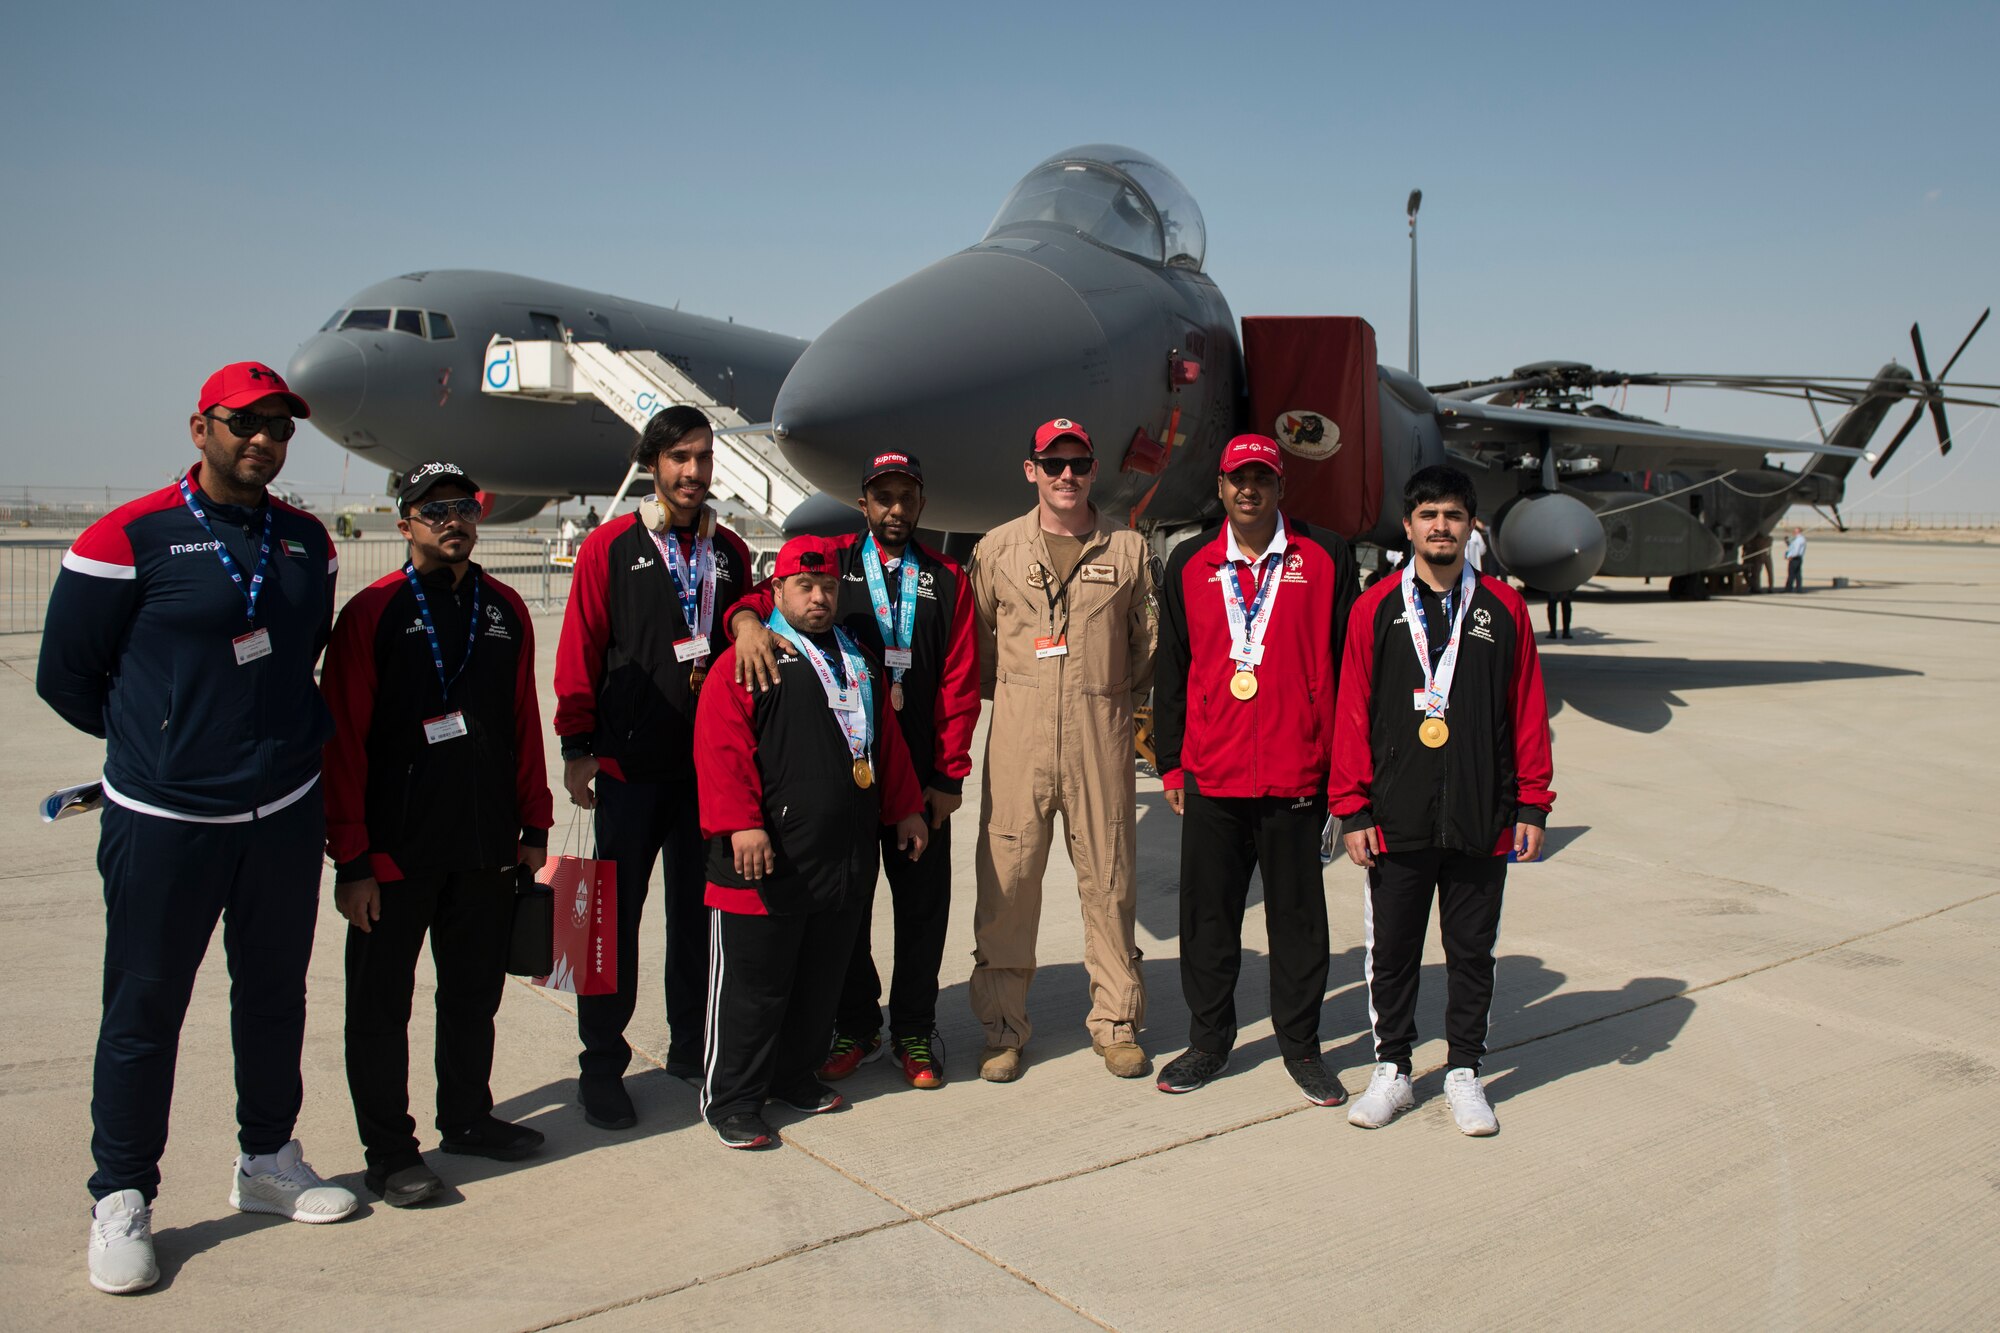 U.S. Air Force 1st Lt. Joshua Bezold, an F-15E Strike Eagle pilot with the 494th Fighter Squadron, briefs the United Arab Emirates Special Olympics team at the Dubai Airshow, United Arab Emirates, Nov. 18, 2019.